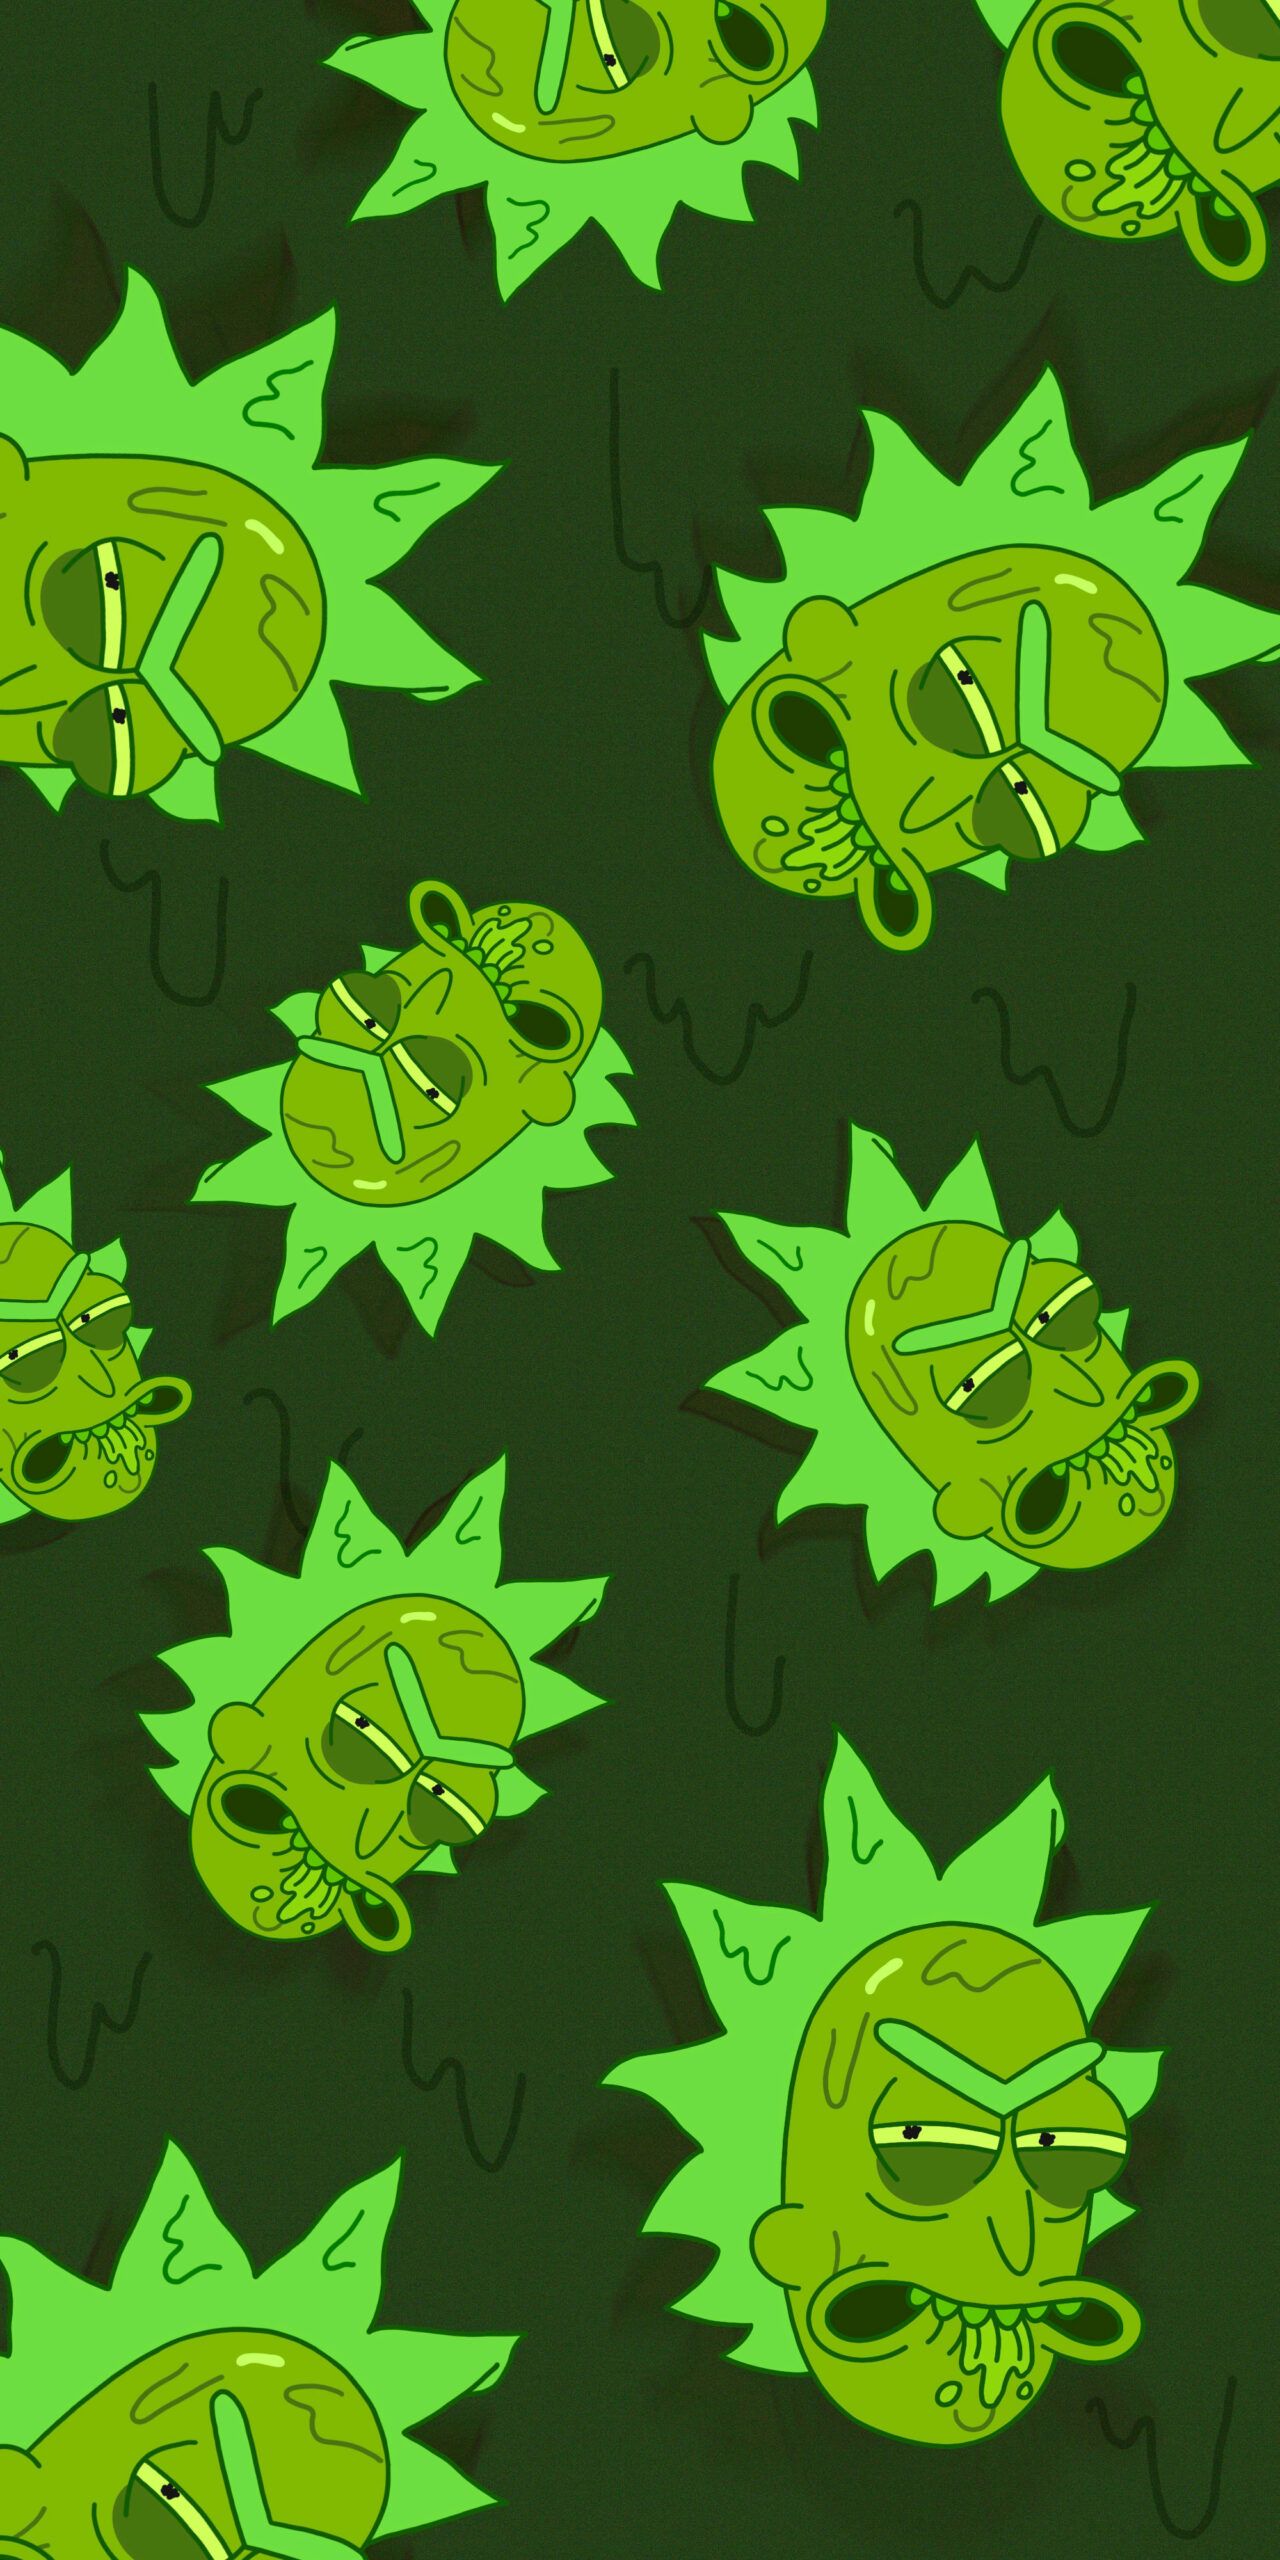 Iphone wallpaper rick and morty wallpaper background - Rick and Morty